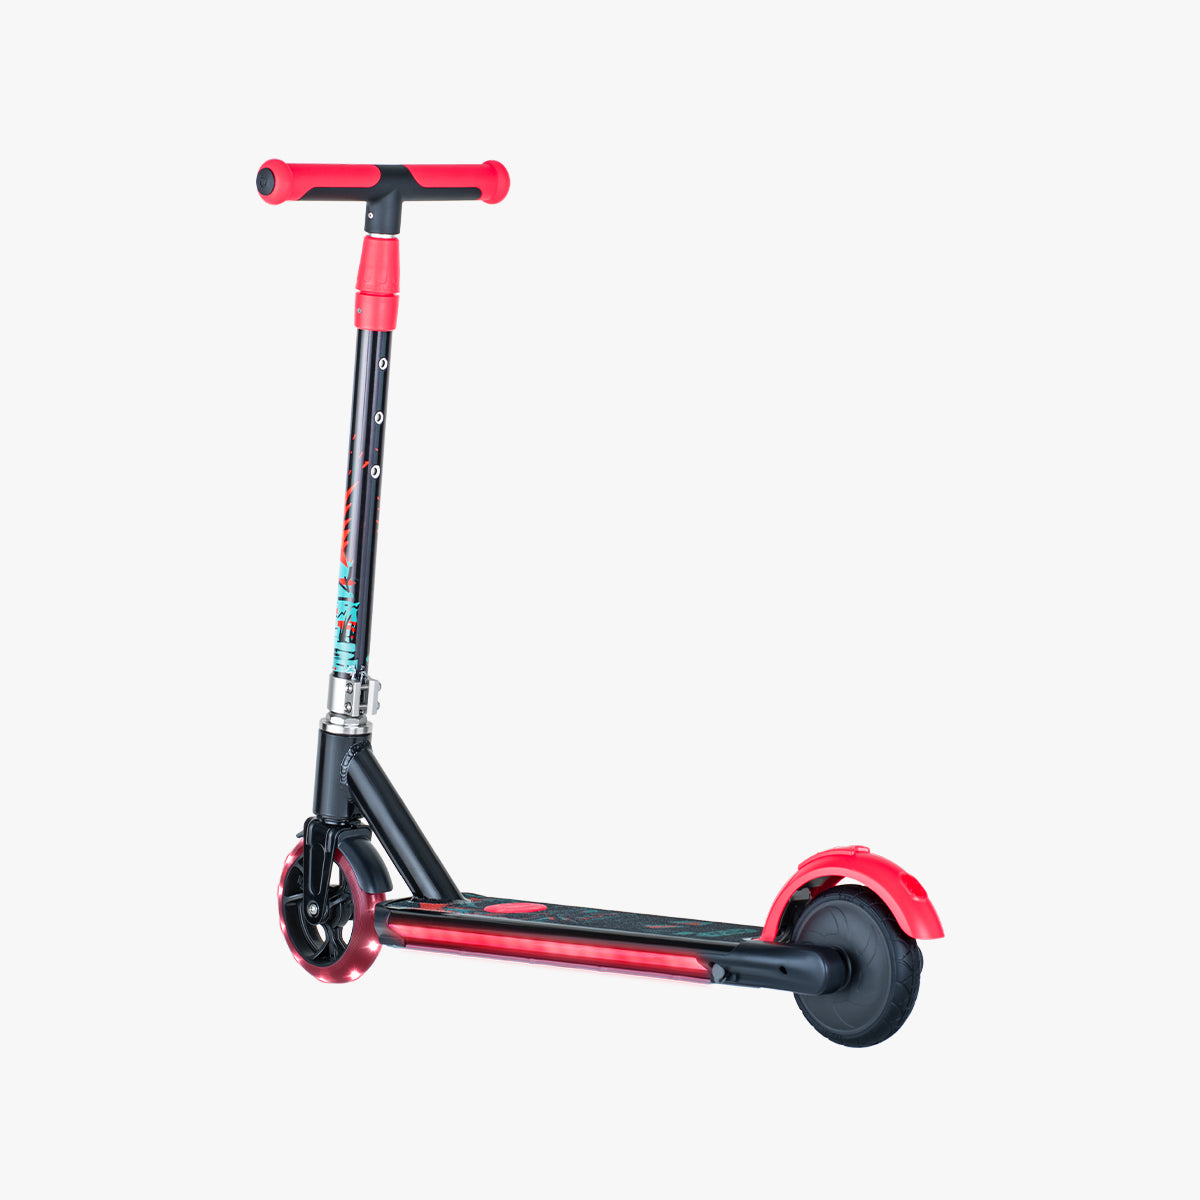 rear angled view of the darth vader electric scooter facing the left